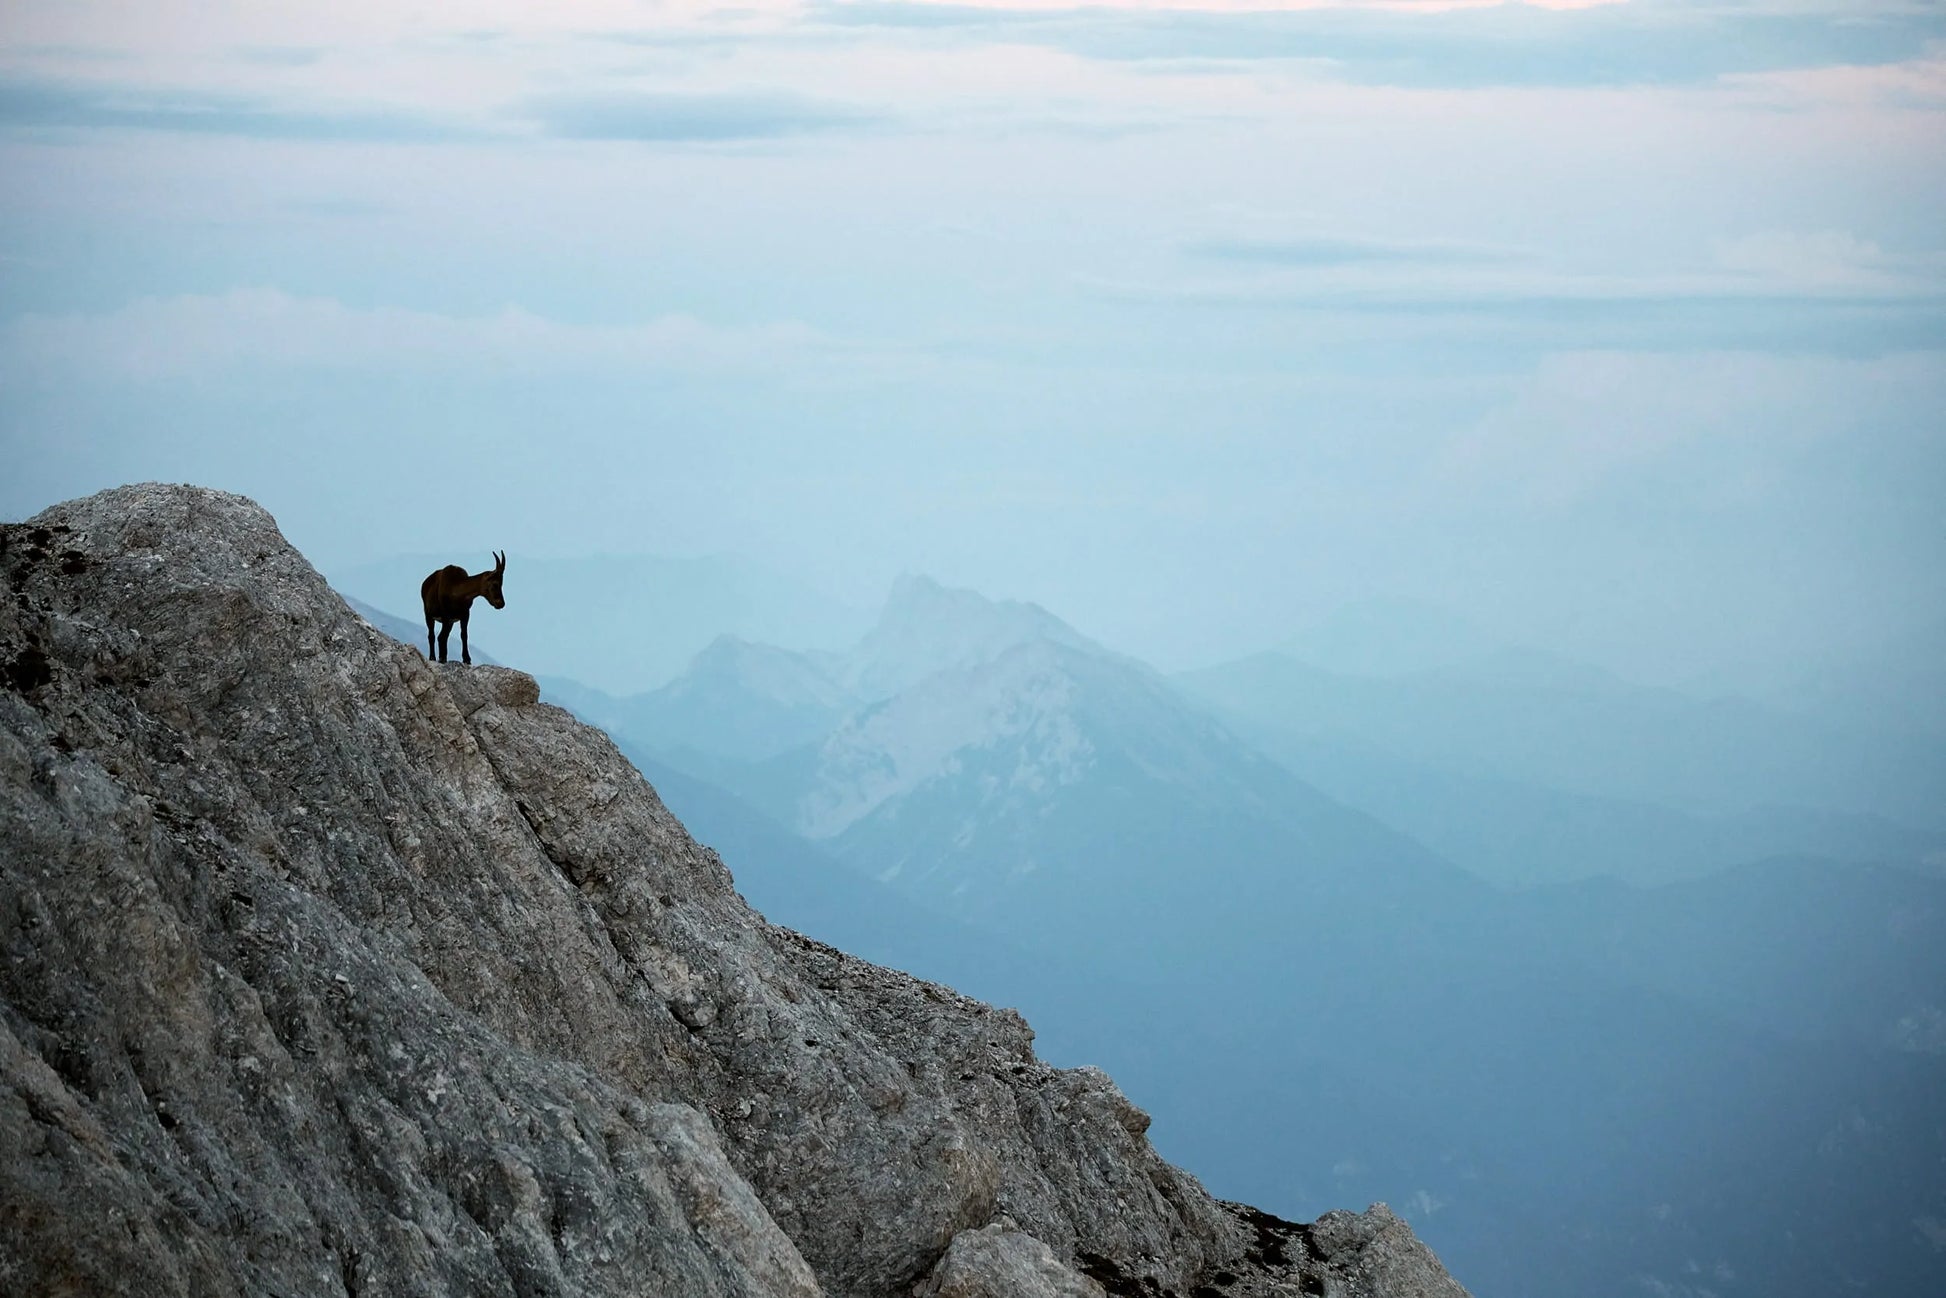 The artpiece 'The Watch' by Chris König shows a mountain goat standing on a rocky mountainside in the Julian Alps in Slovenia.